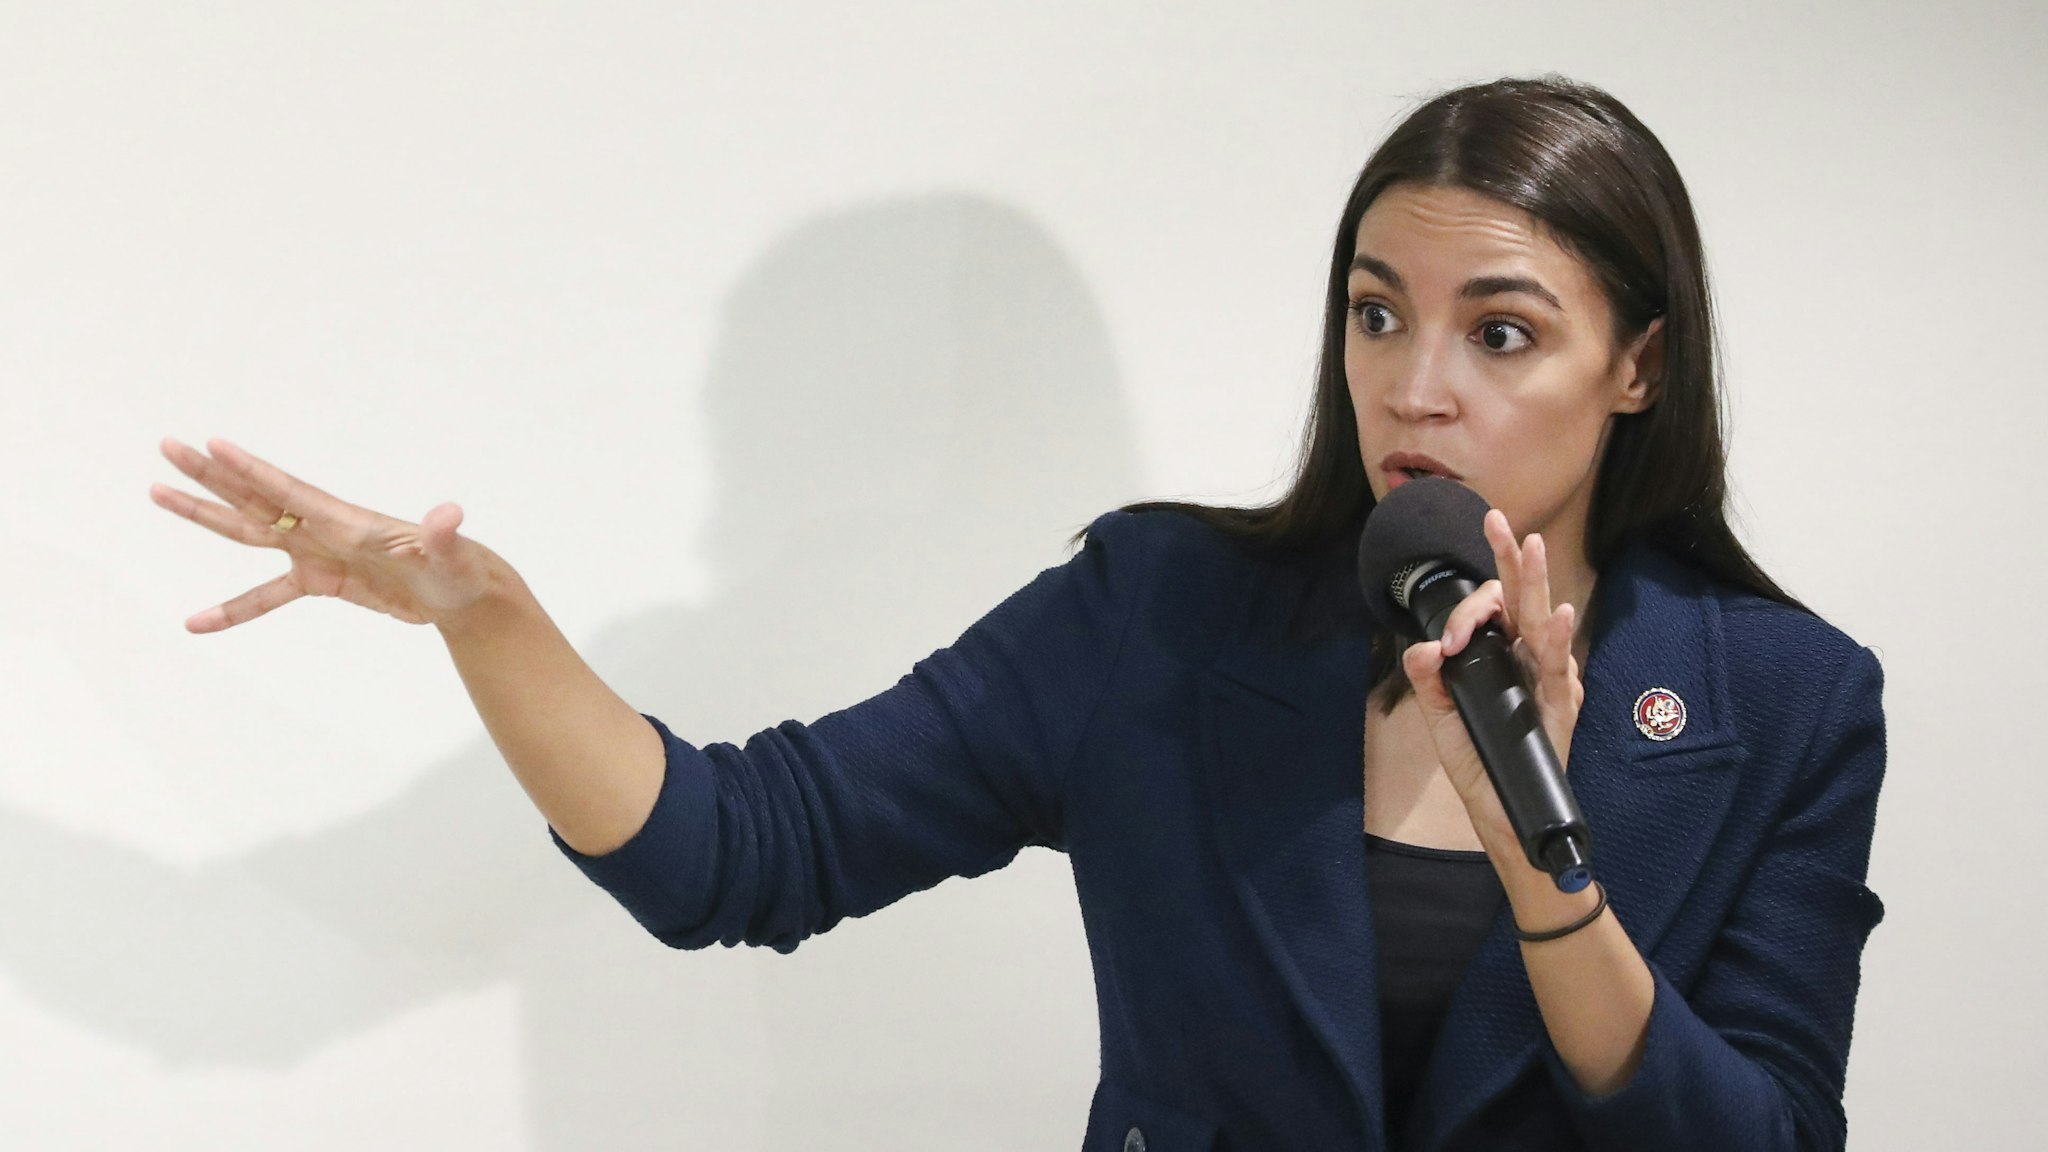 U.S. Rep. Alexandria Ocasio-Cortez (D-NY) speaks during a town hall meeting at the LeFrak City Queens Library on October 3, 2019 in the Queens borough of New York City.